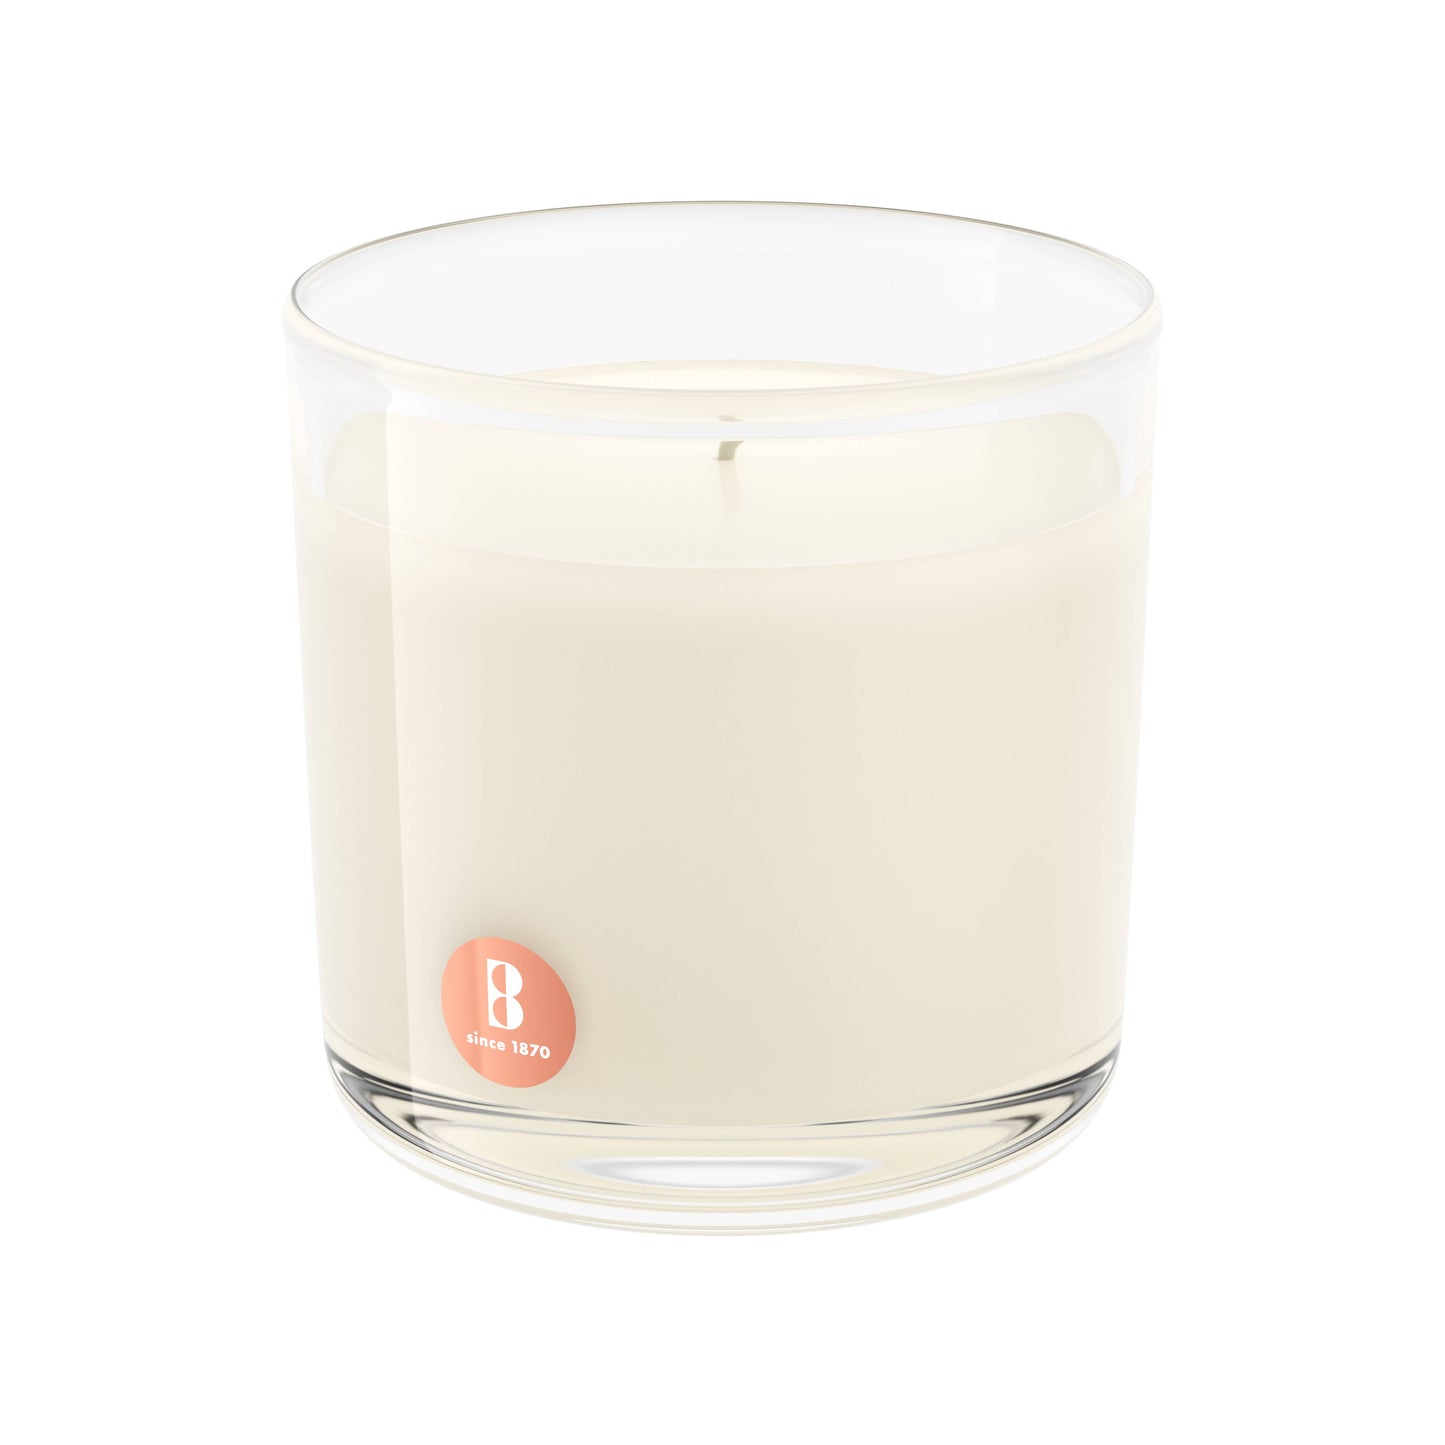 Vanilla Scented Candle - 3.75 x 3.75 Inches - 43 Hour